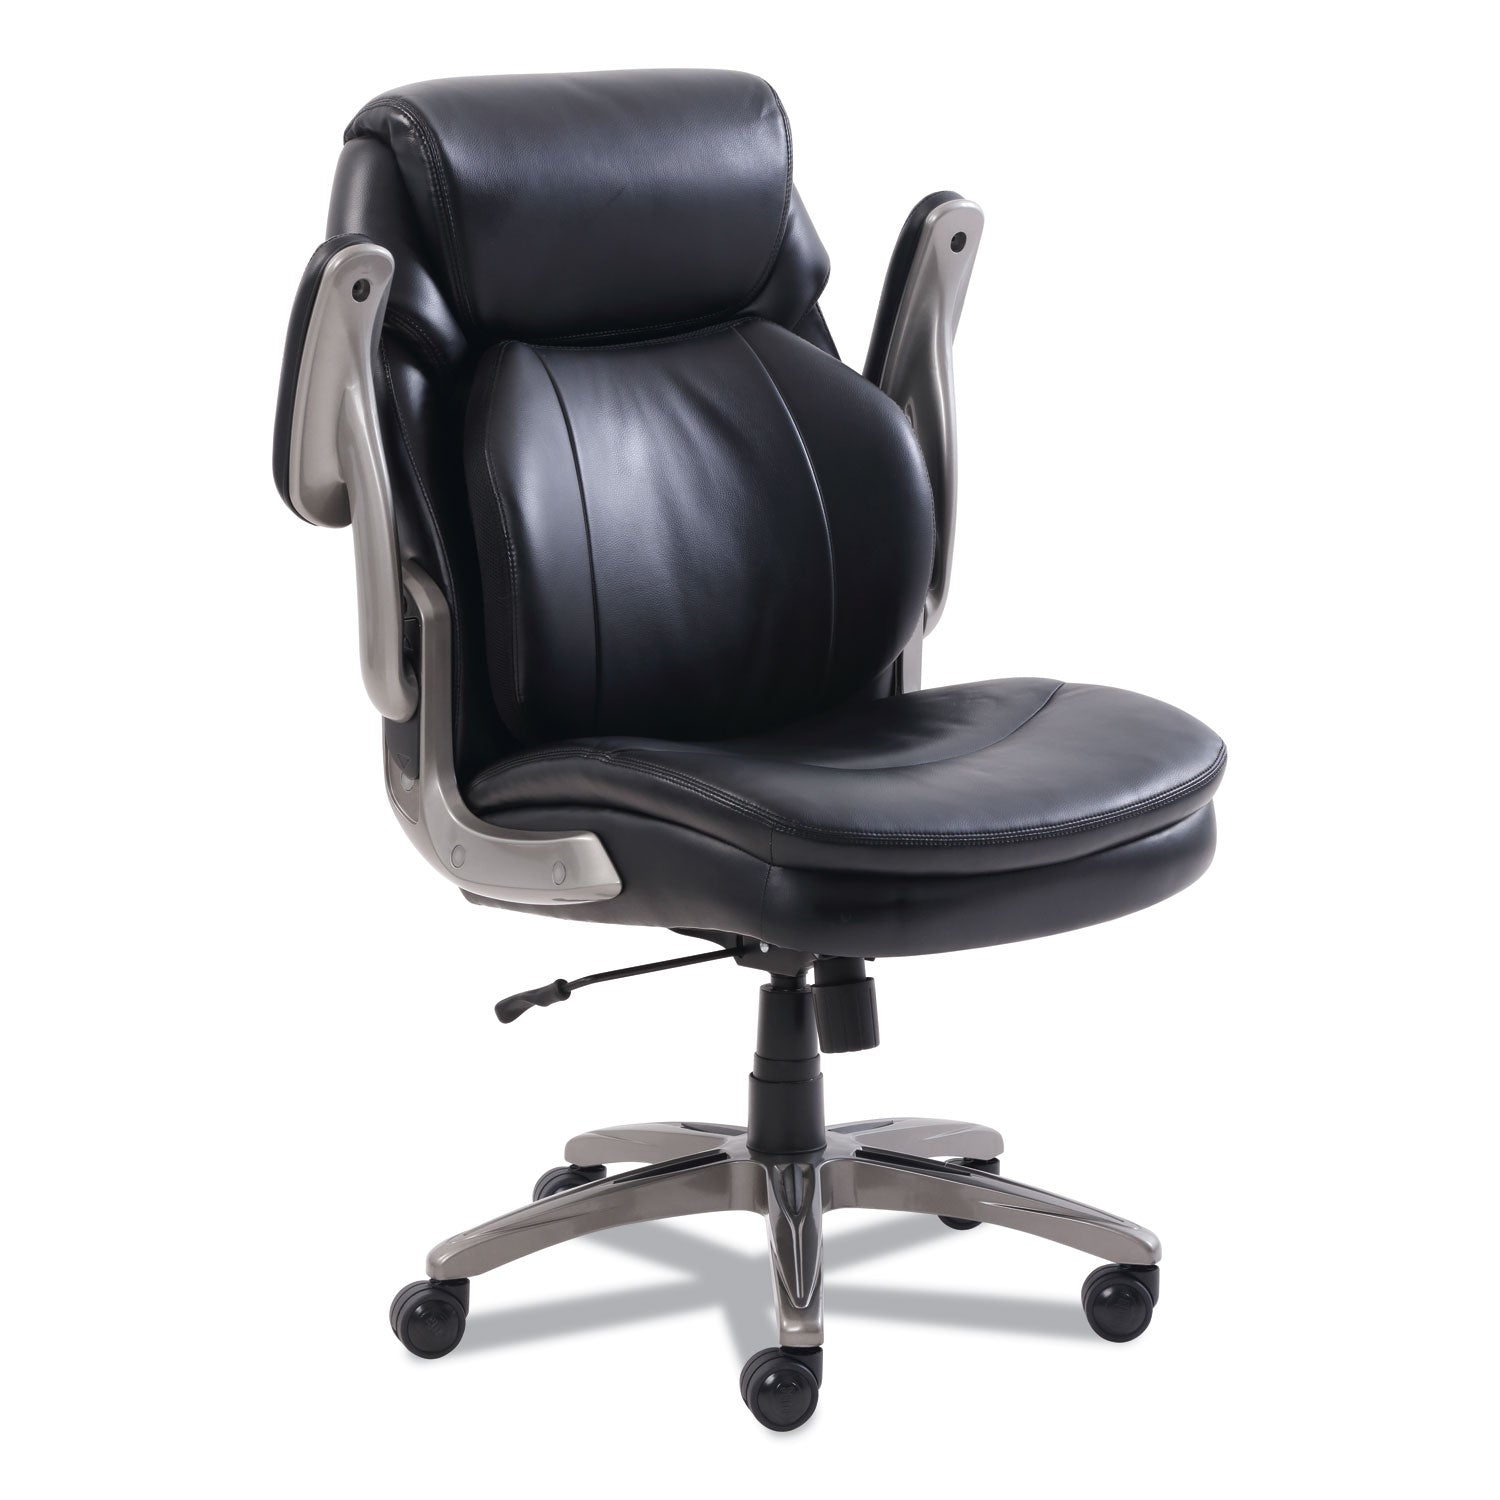 cosset-mid-back-executive-chair-supports-up-to-275-lb-185-to-215-seat-height-black-seat-back-slate-base_srj48966 - 5